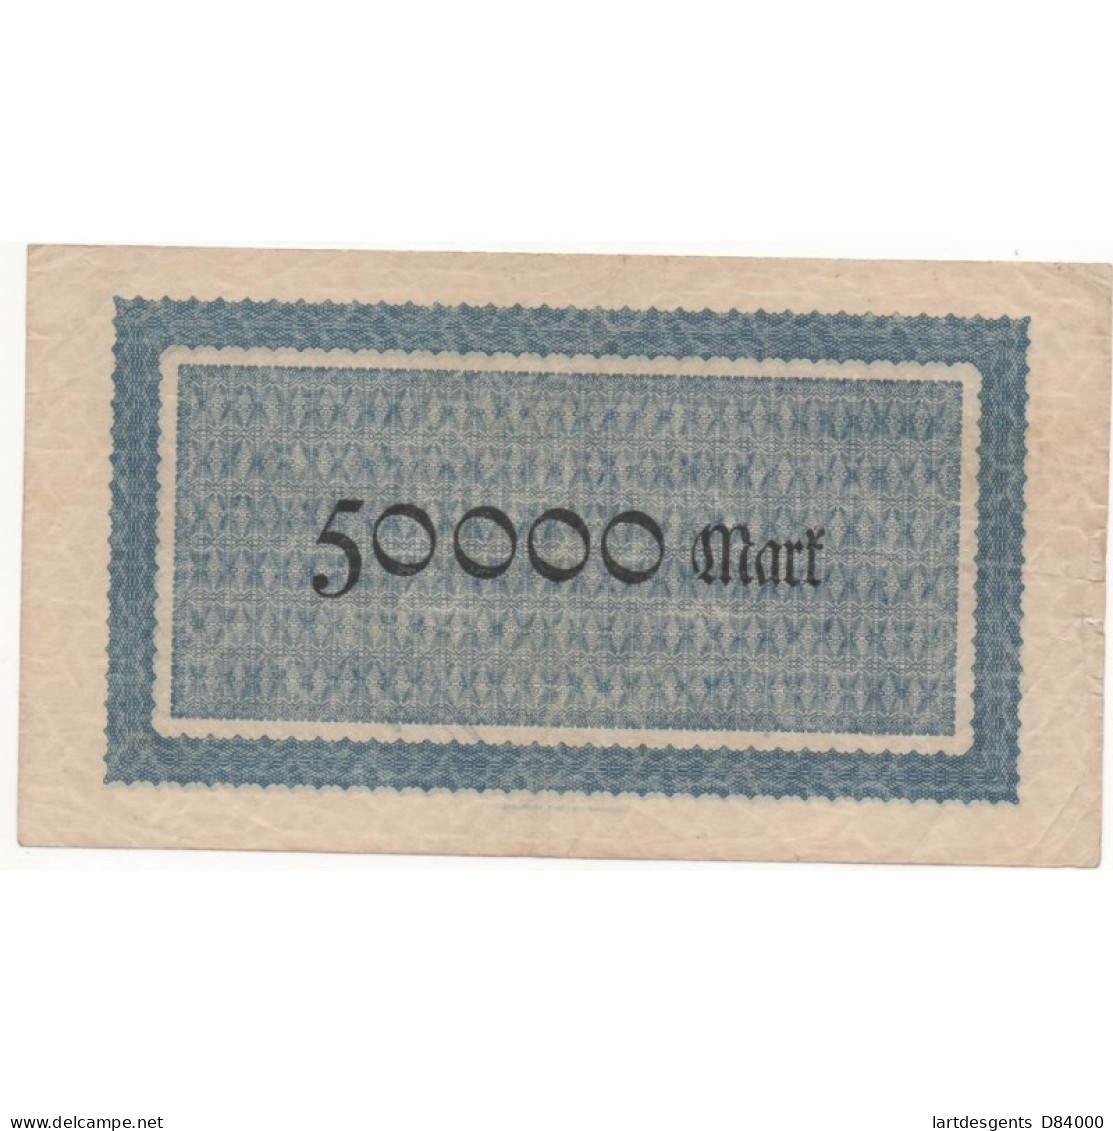 NOTGELD - AACHEN - 50.000 Mark - 1923 (A011) - [11] Local Banknote Issues